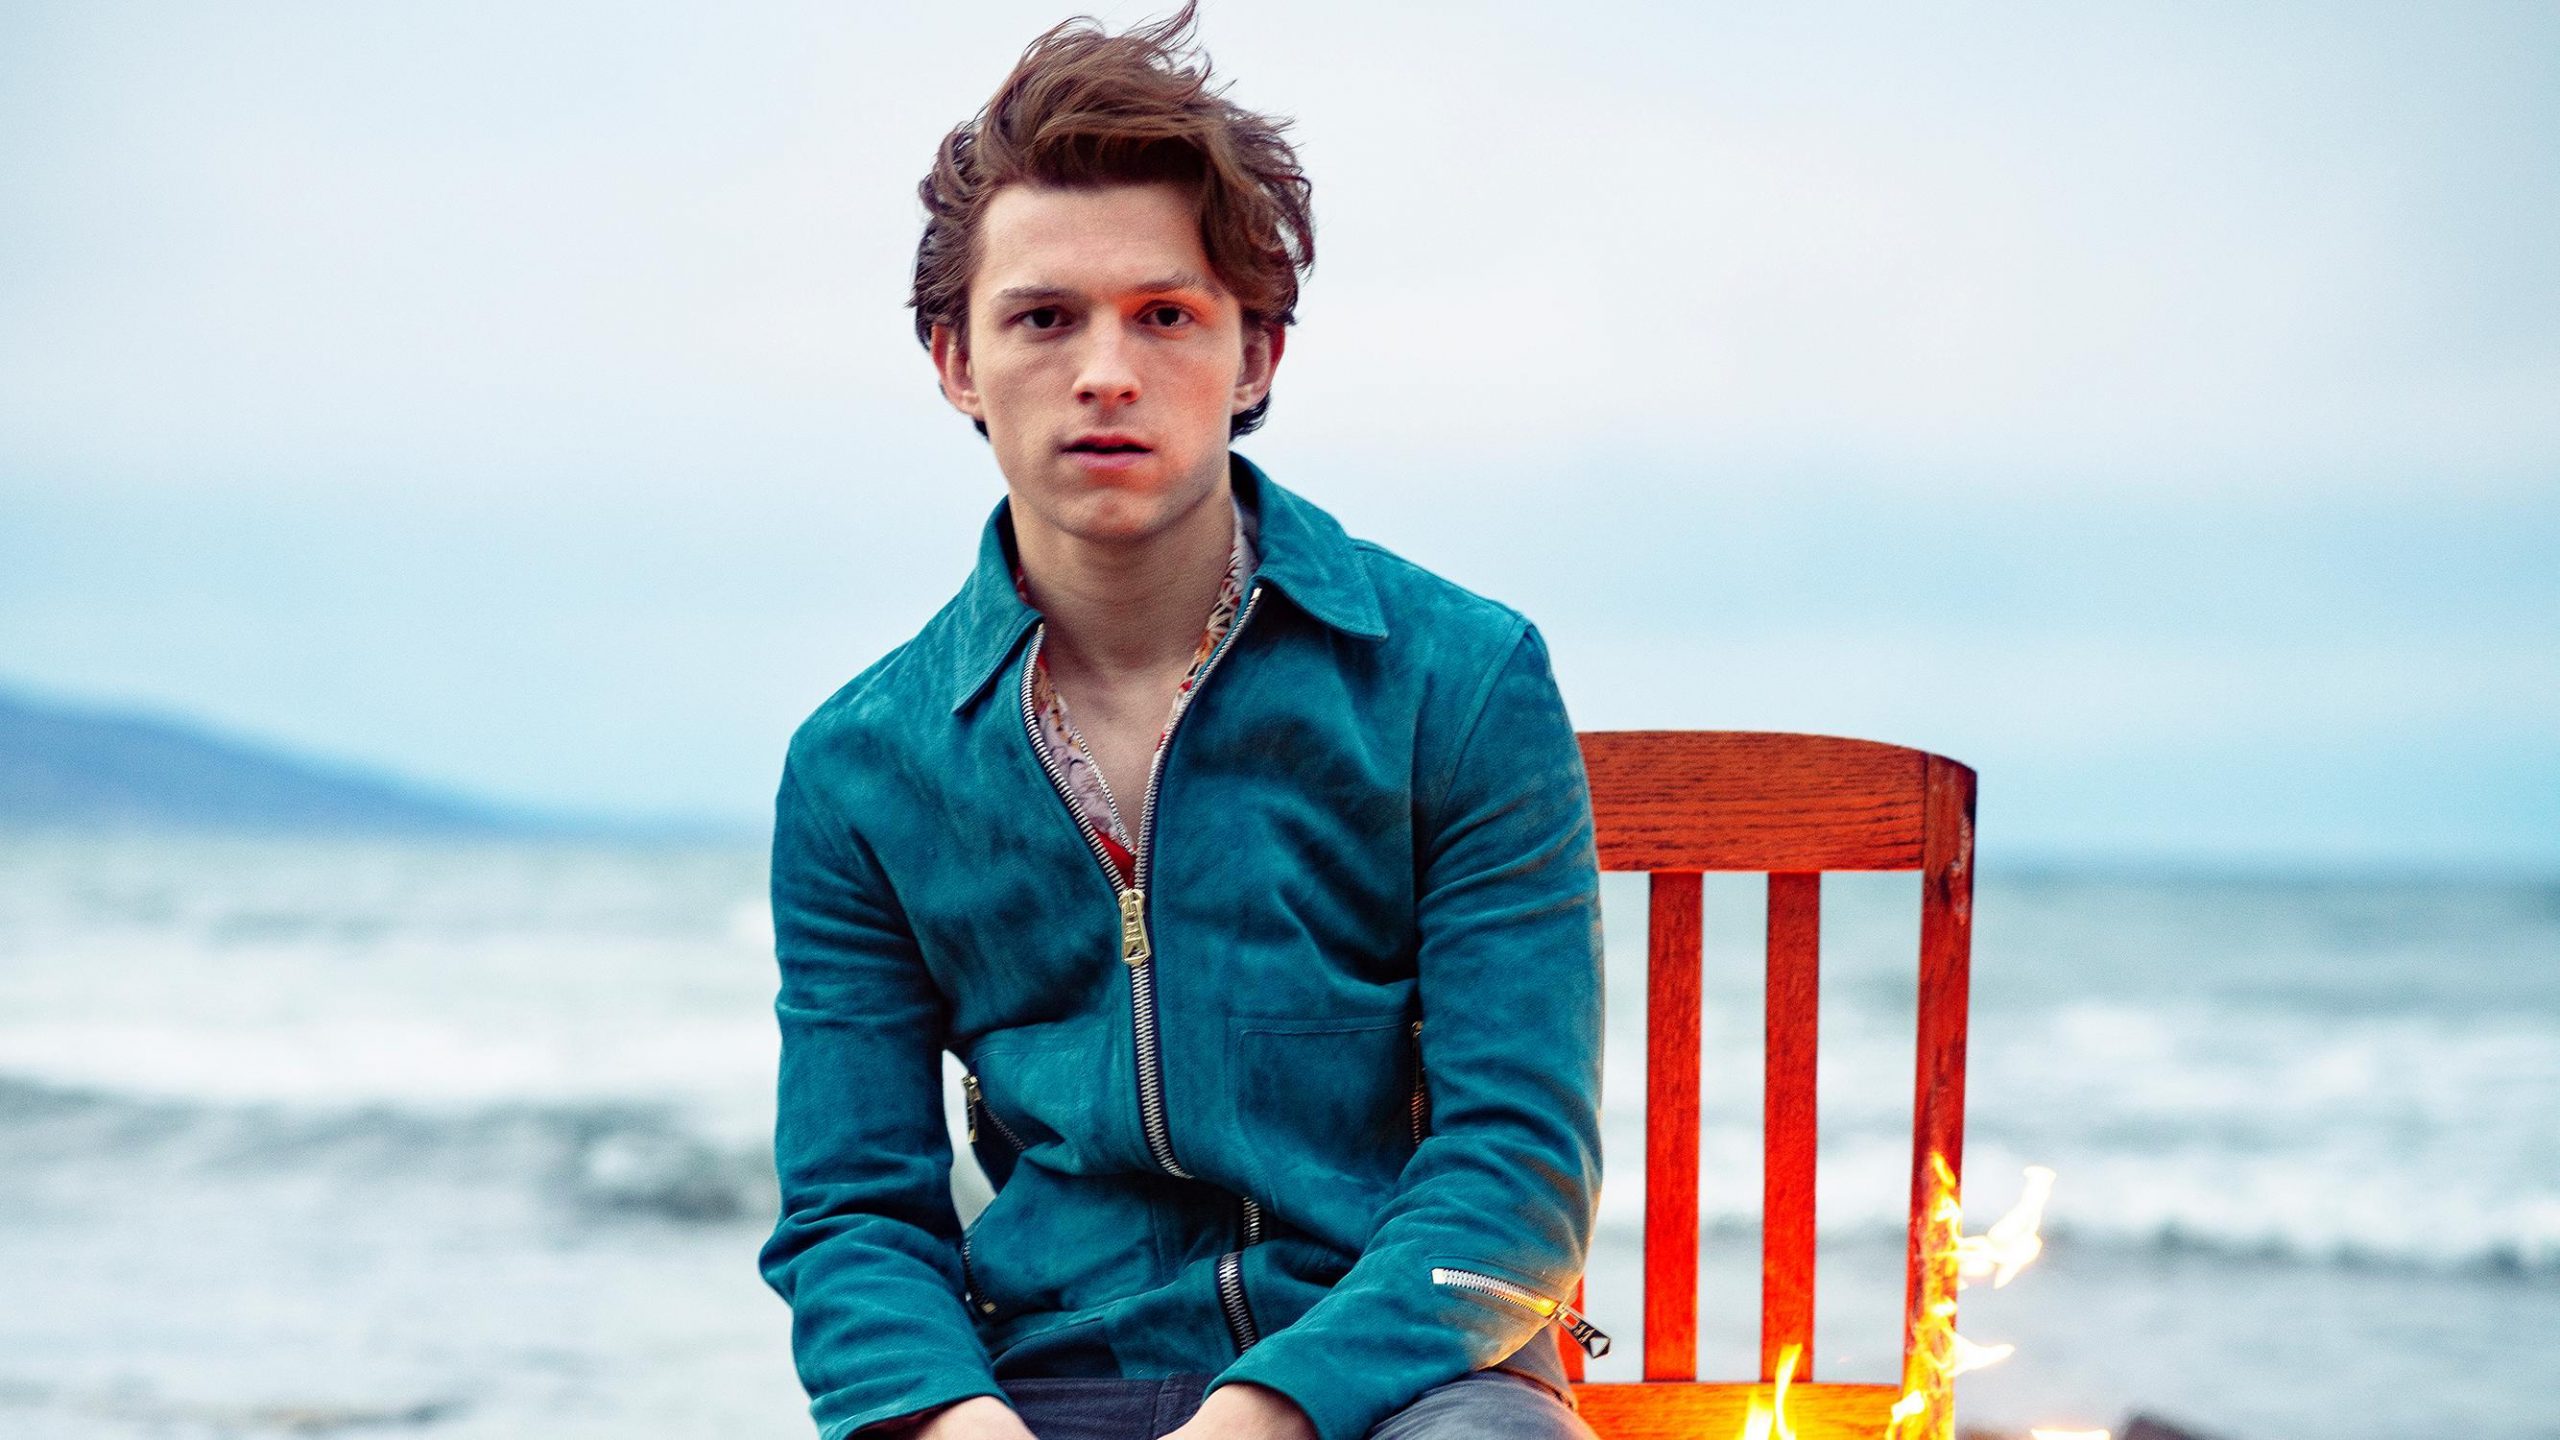 Actor Tom Holland says he will play Fred Astaire in new biopic